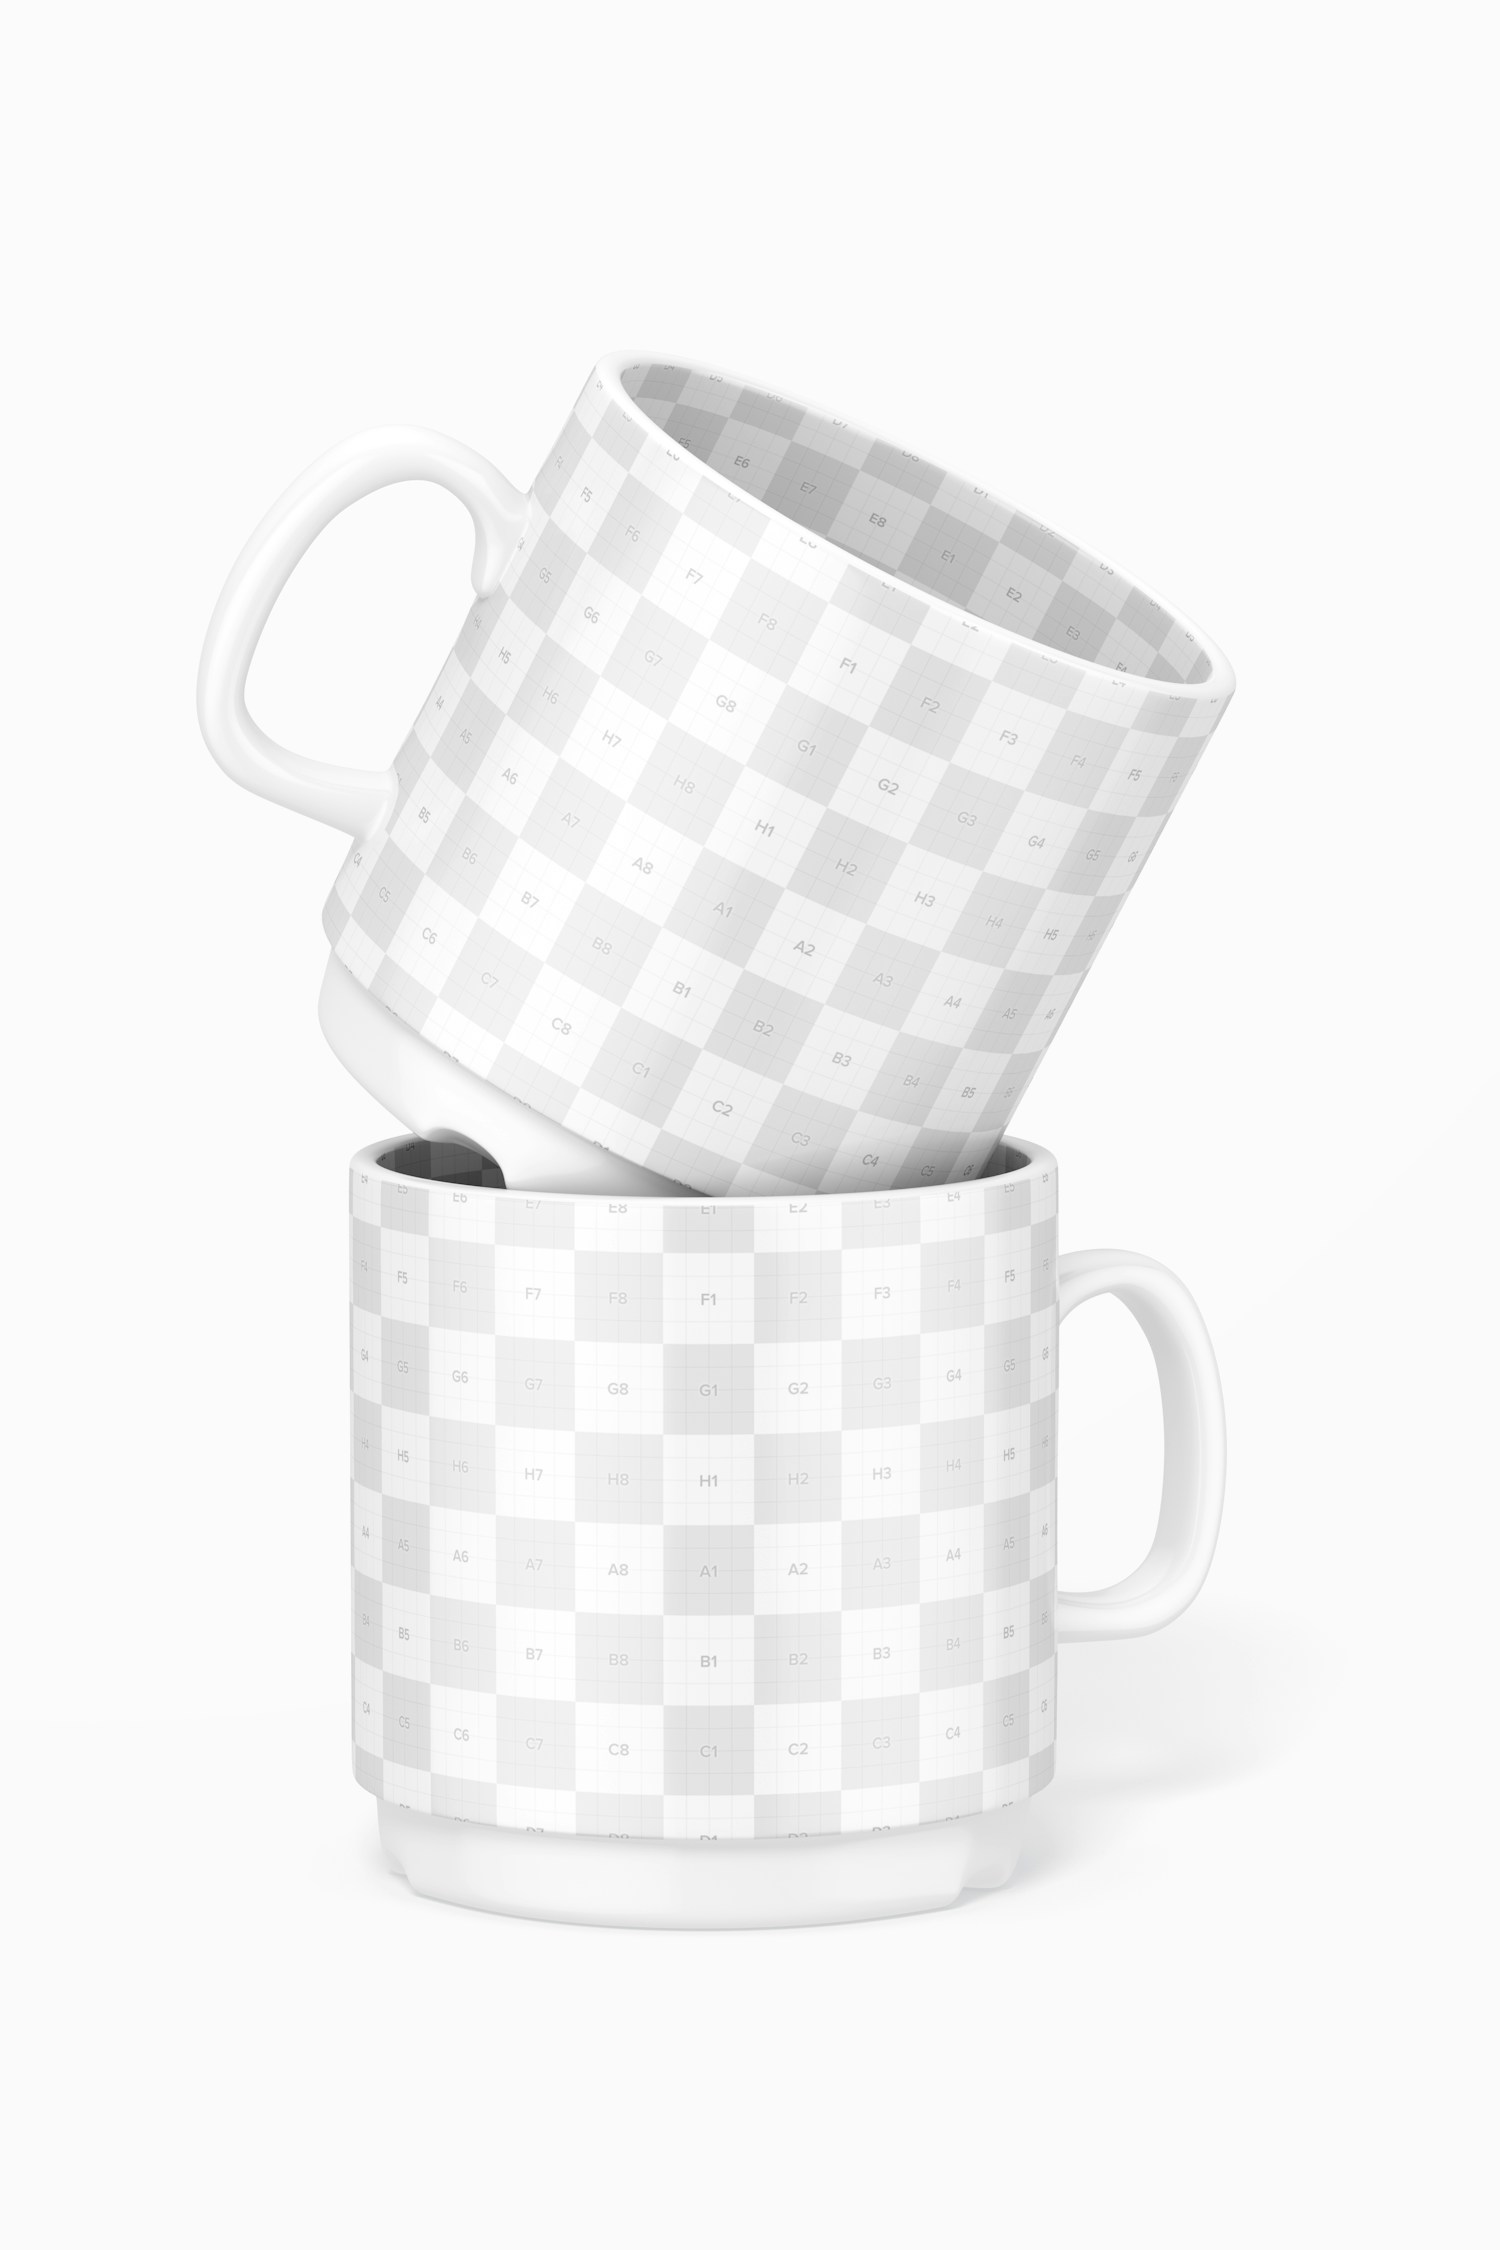 Espresso Cups Mockup, Stacked